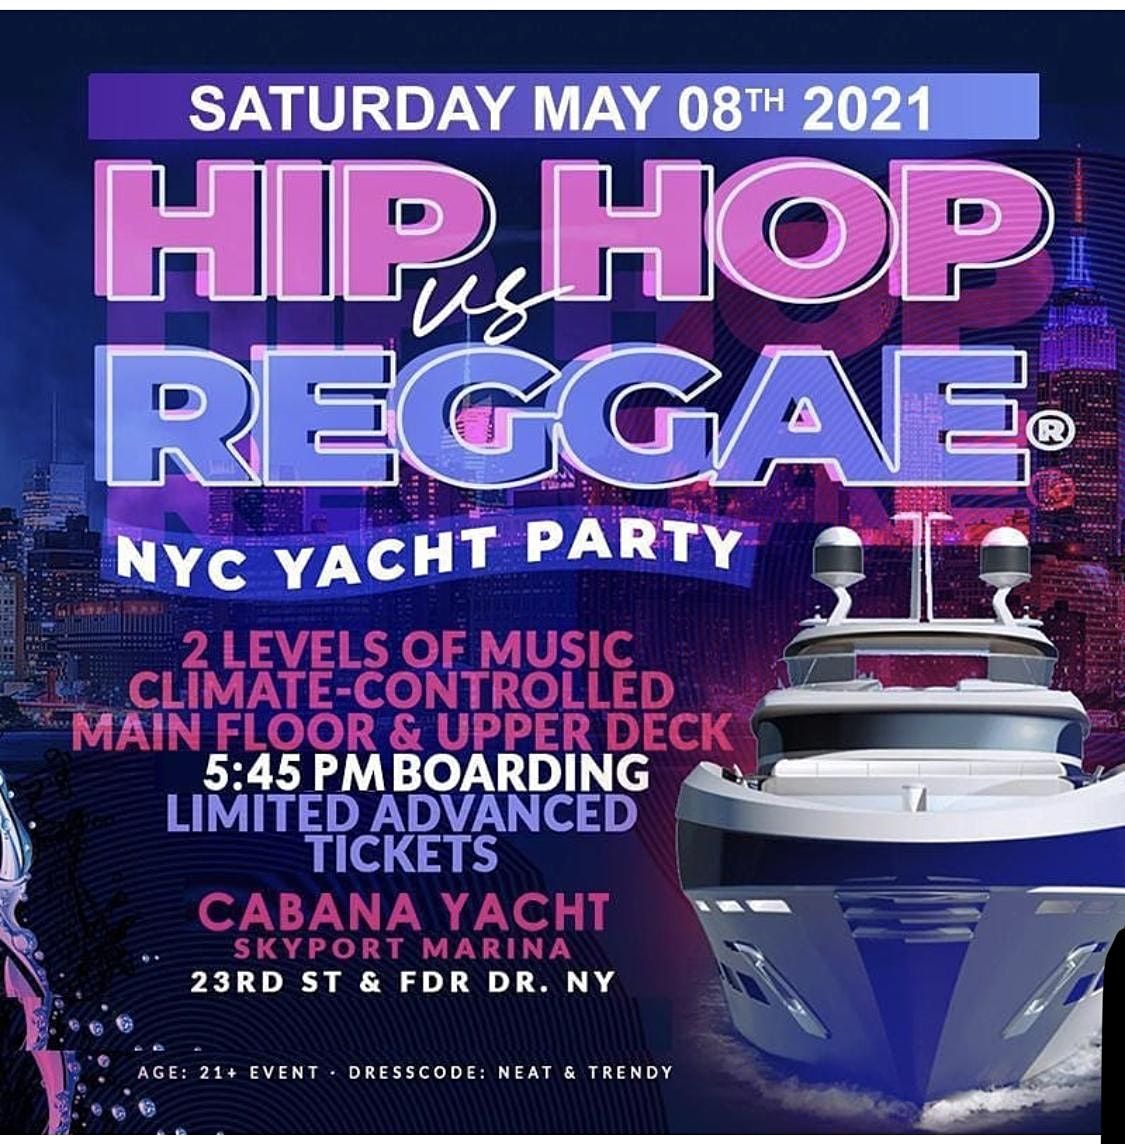 YACHT PARTY NYC! Fri., August 6th